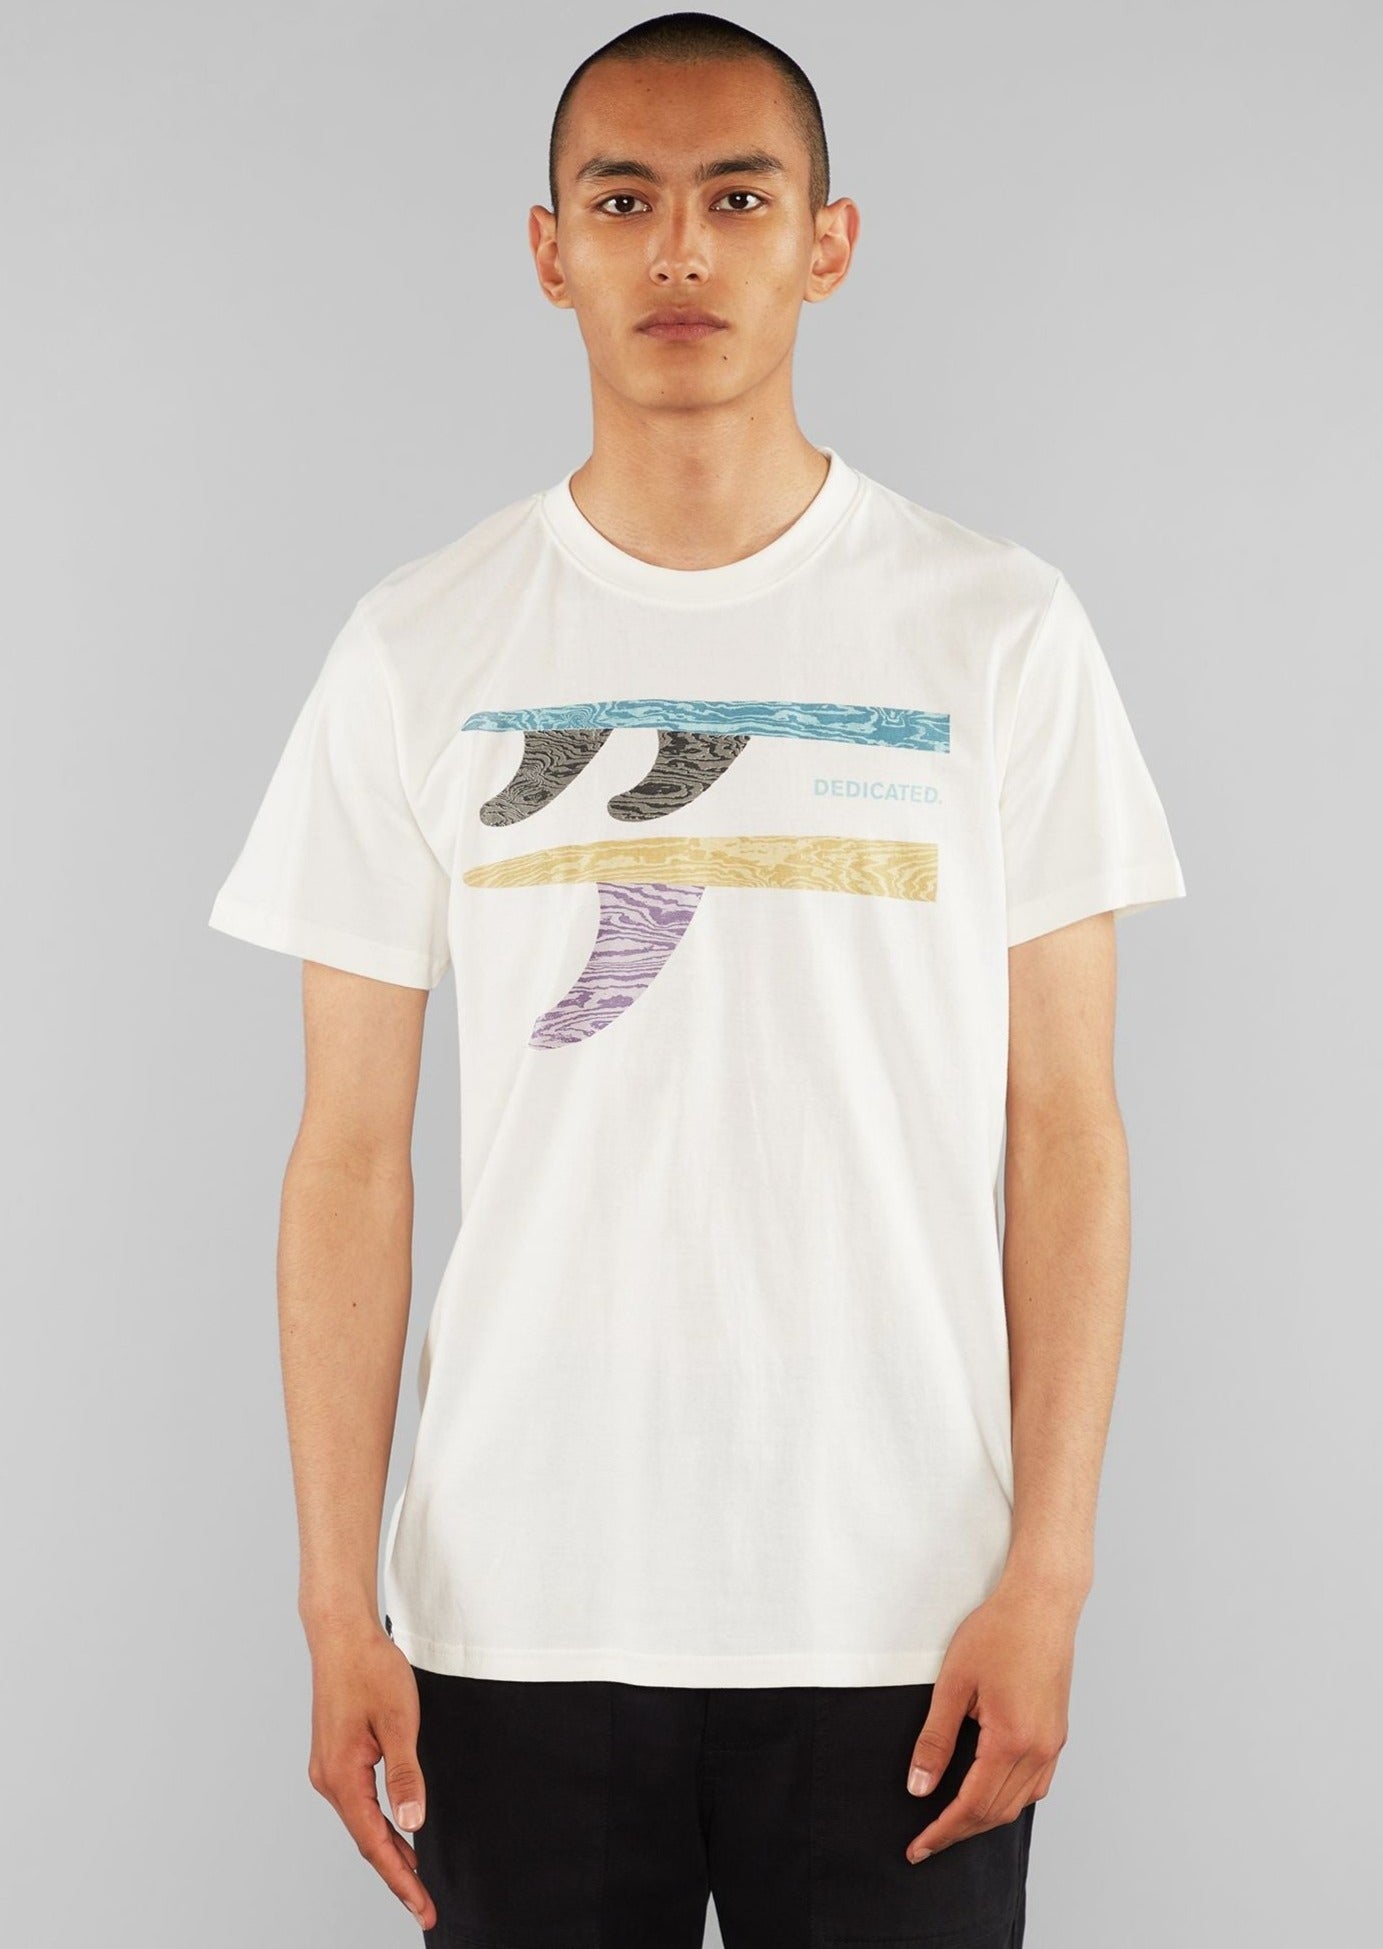 T-Shirt Stockholm Wood Cut Surfboard Off-White | DEDICATED